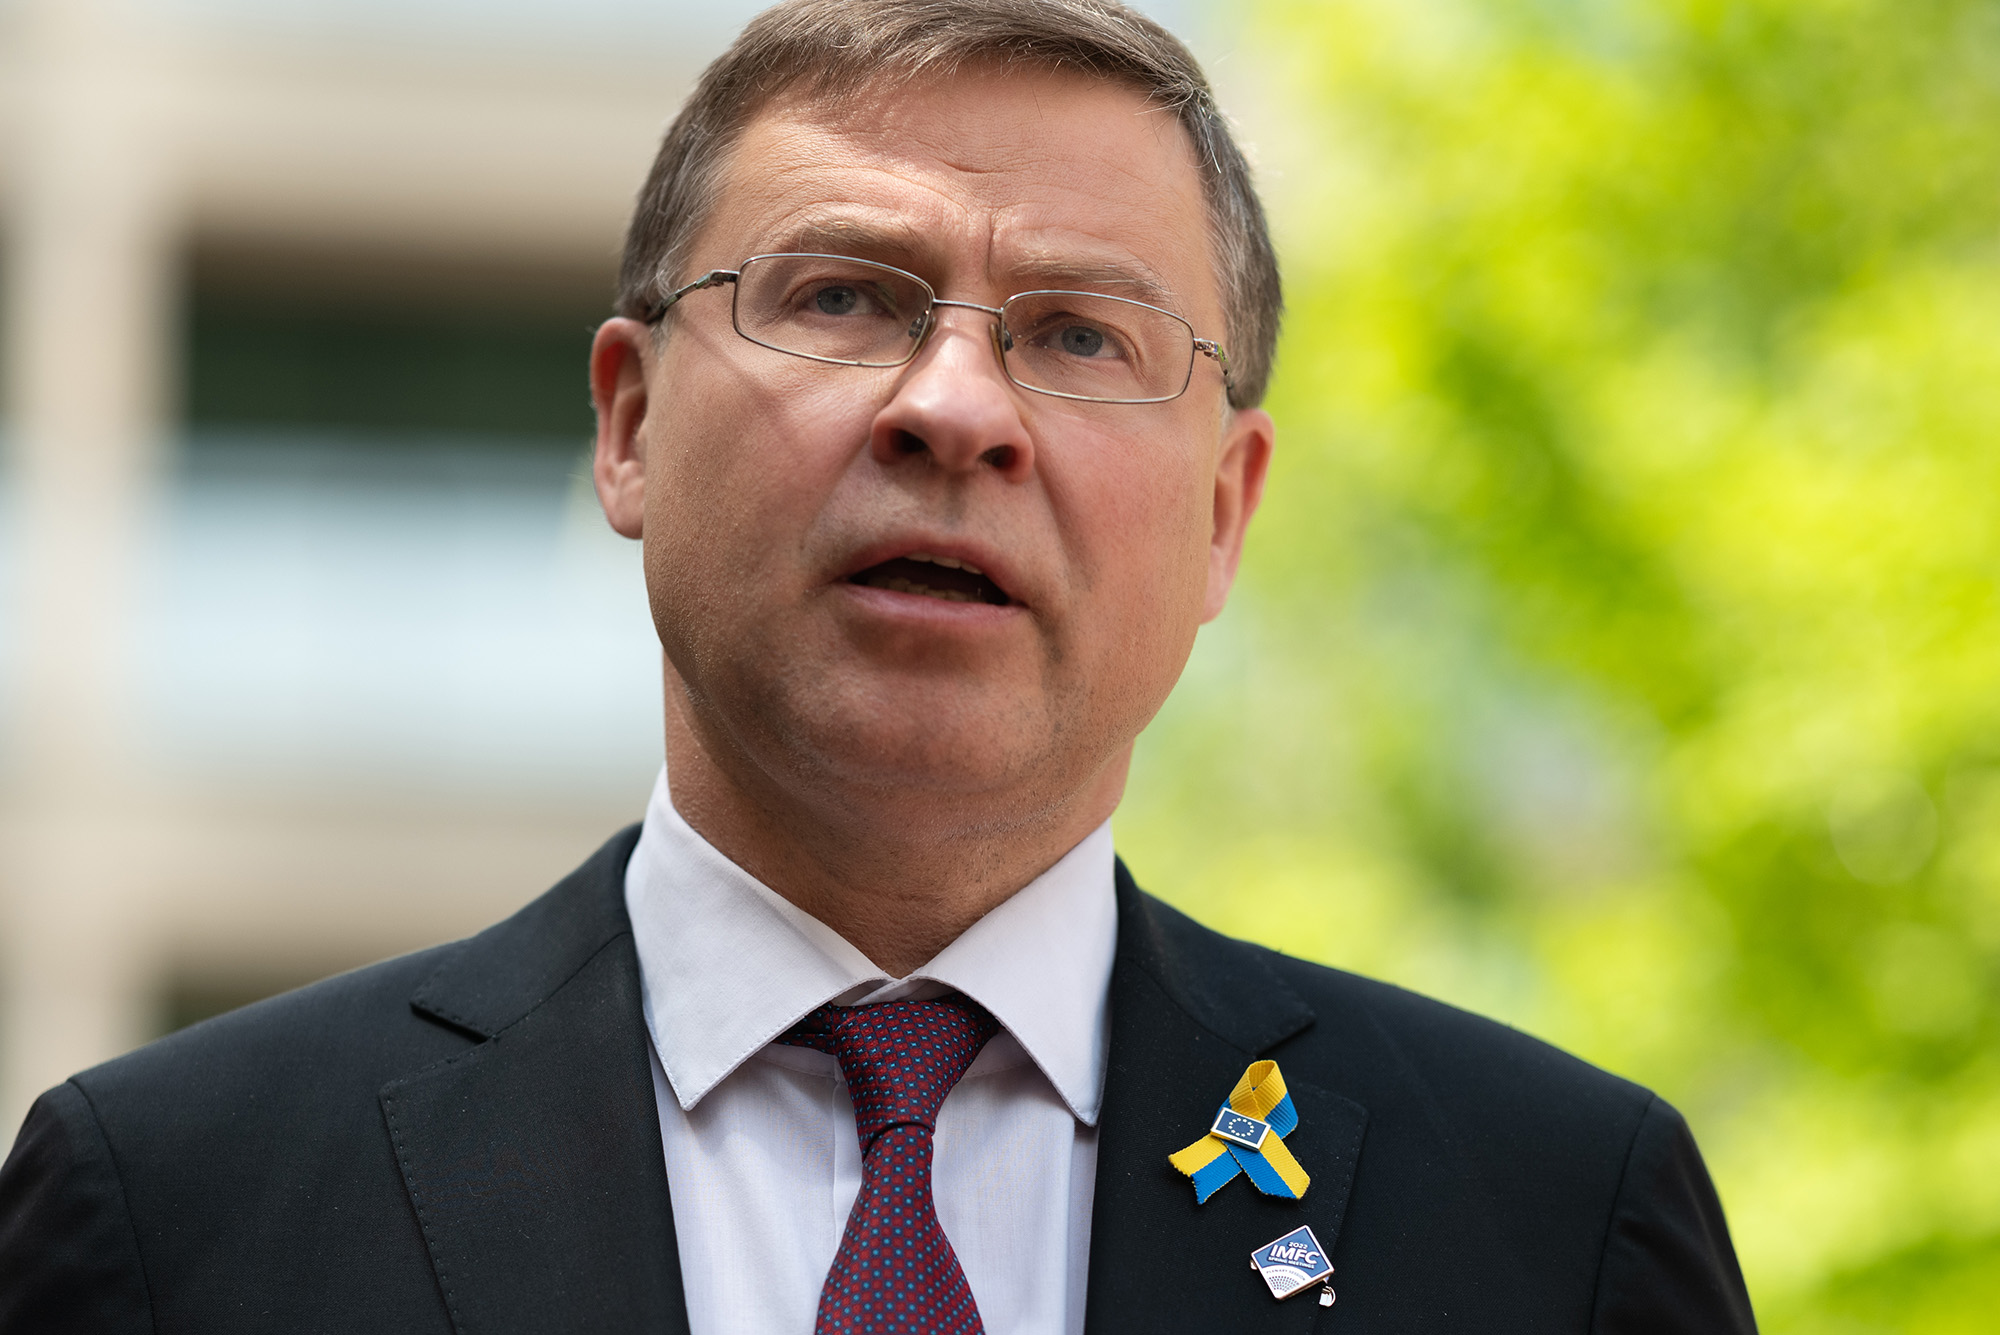 European Commissioner for Trade Valdis Dombrovskis speaks with the media in Washington on Thursday April 21.